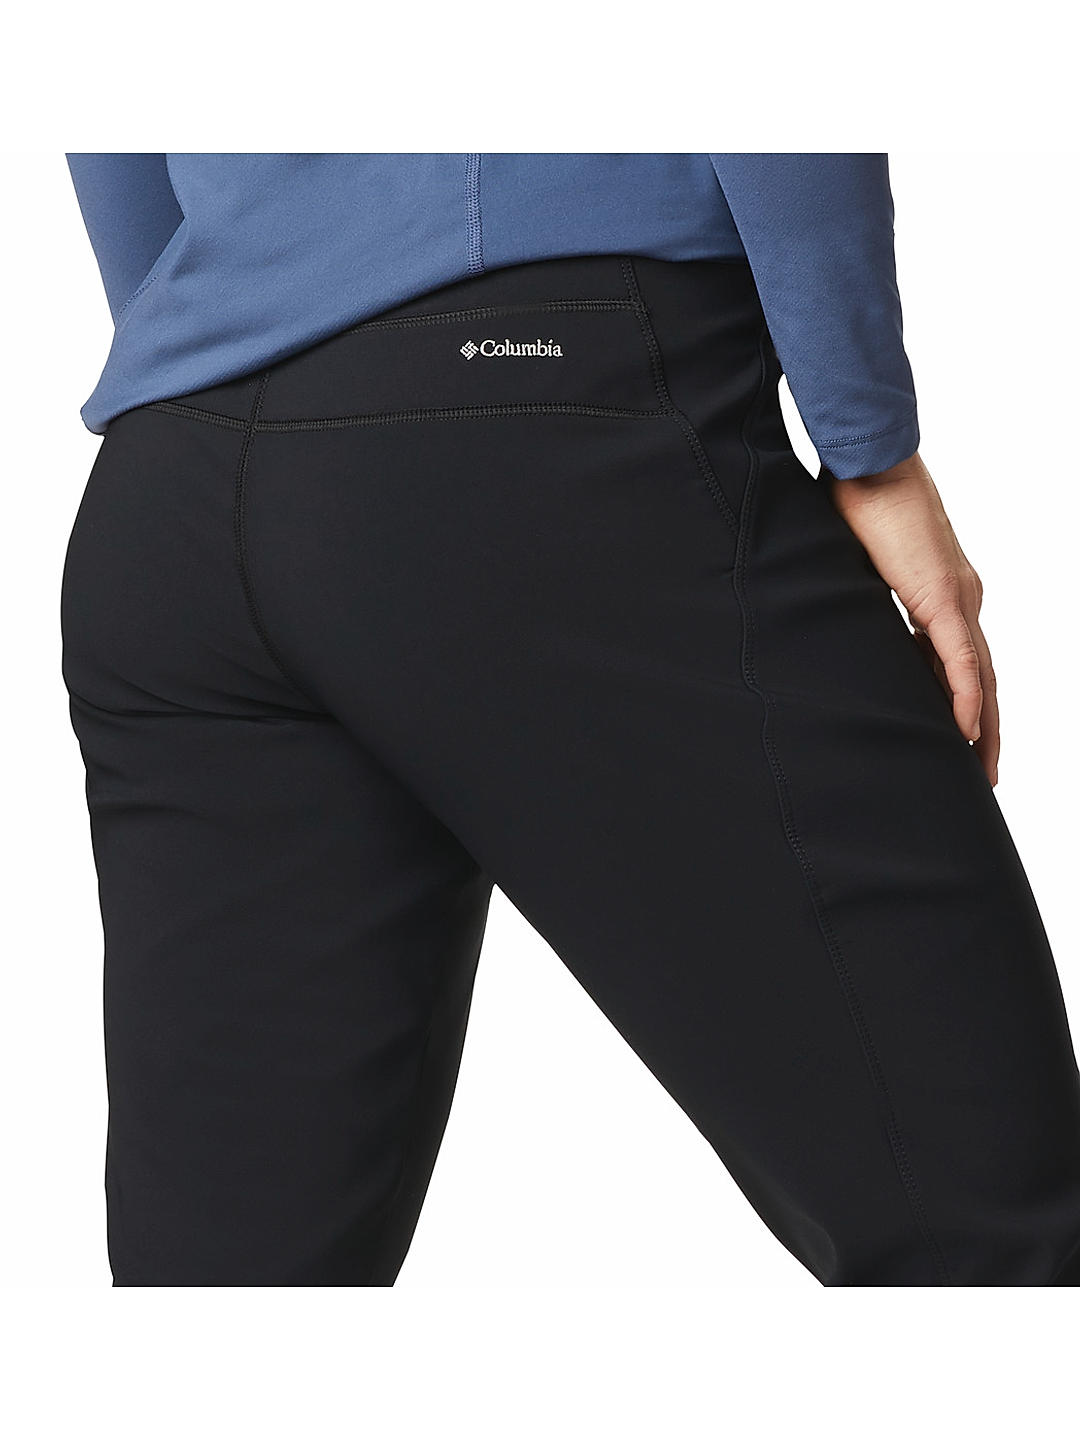 Buy Black Back Beauty Highrise Warm Winter Pant for Women Online at  Columbia Sportswear